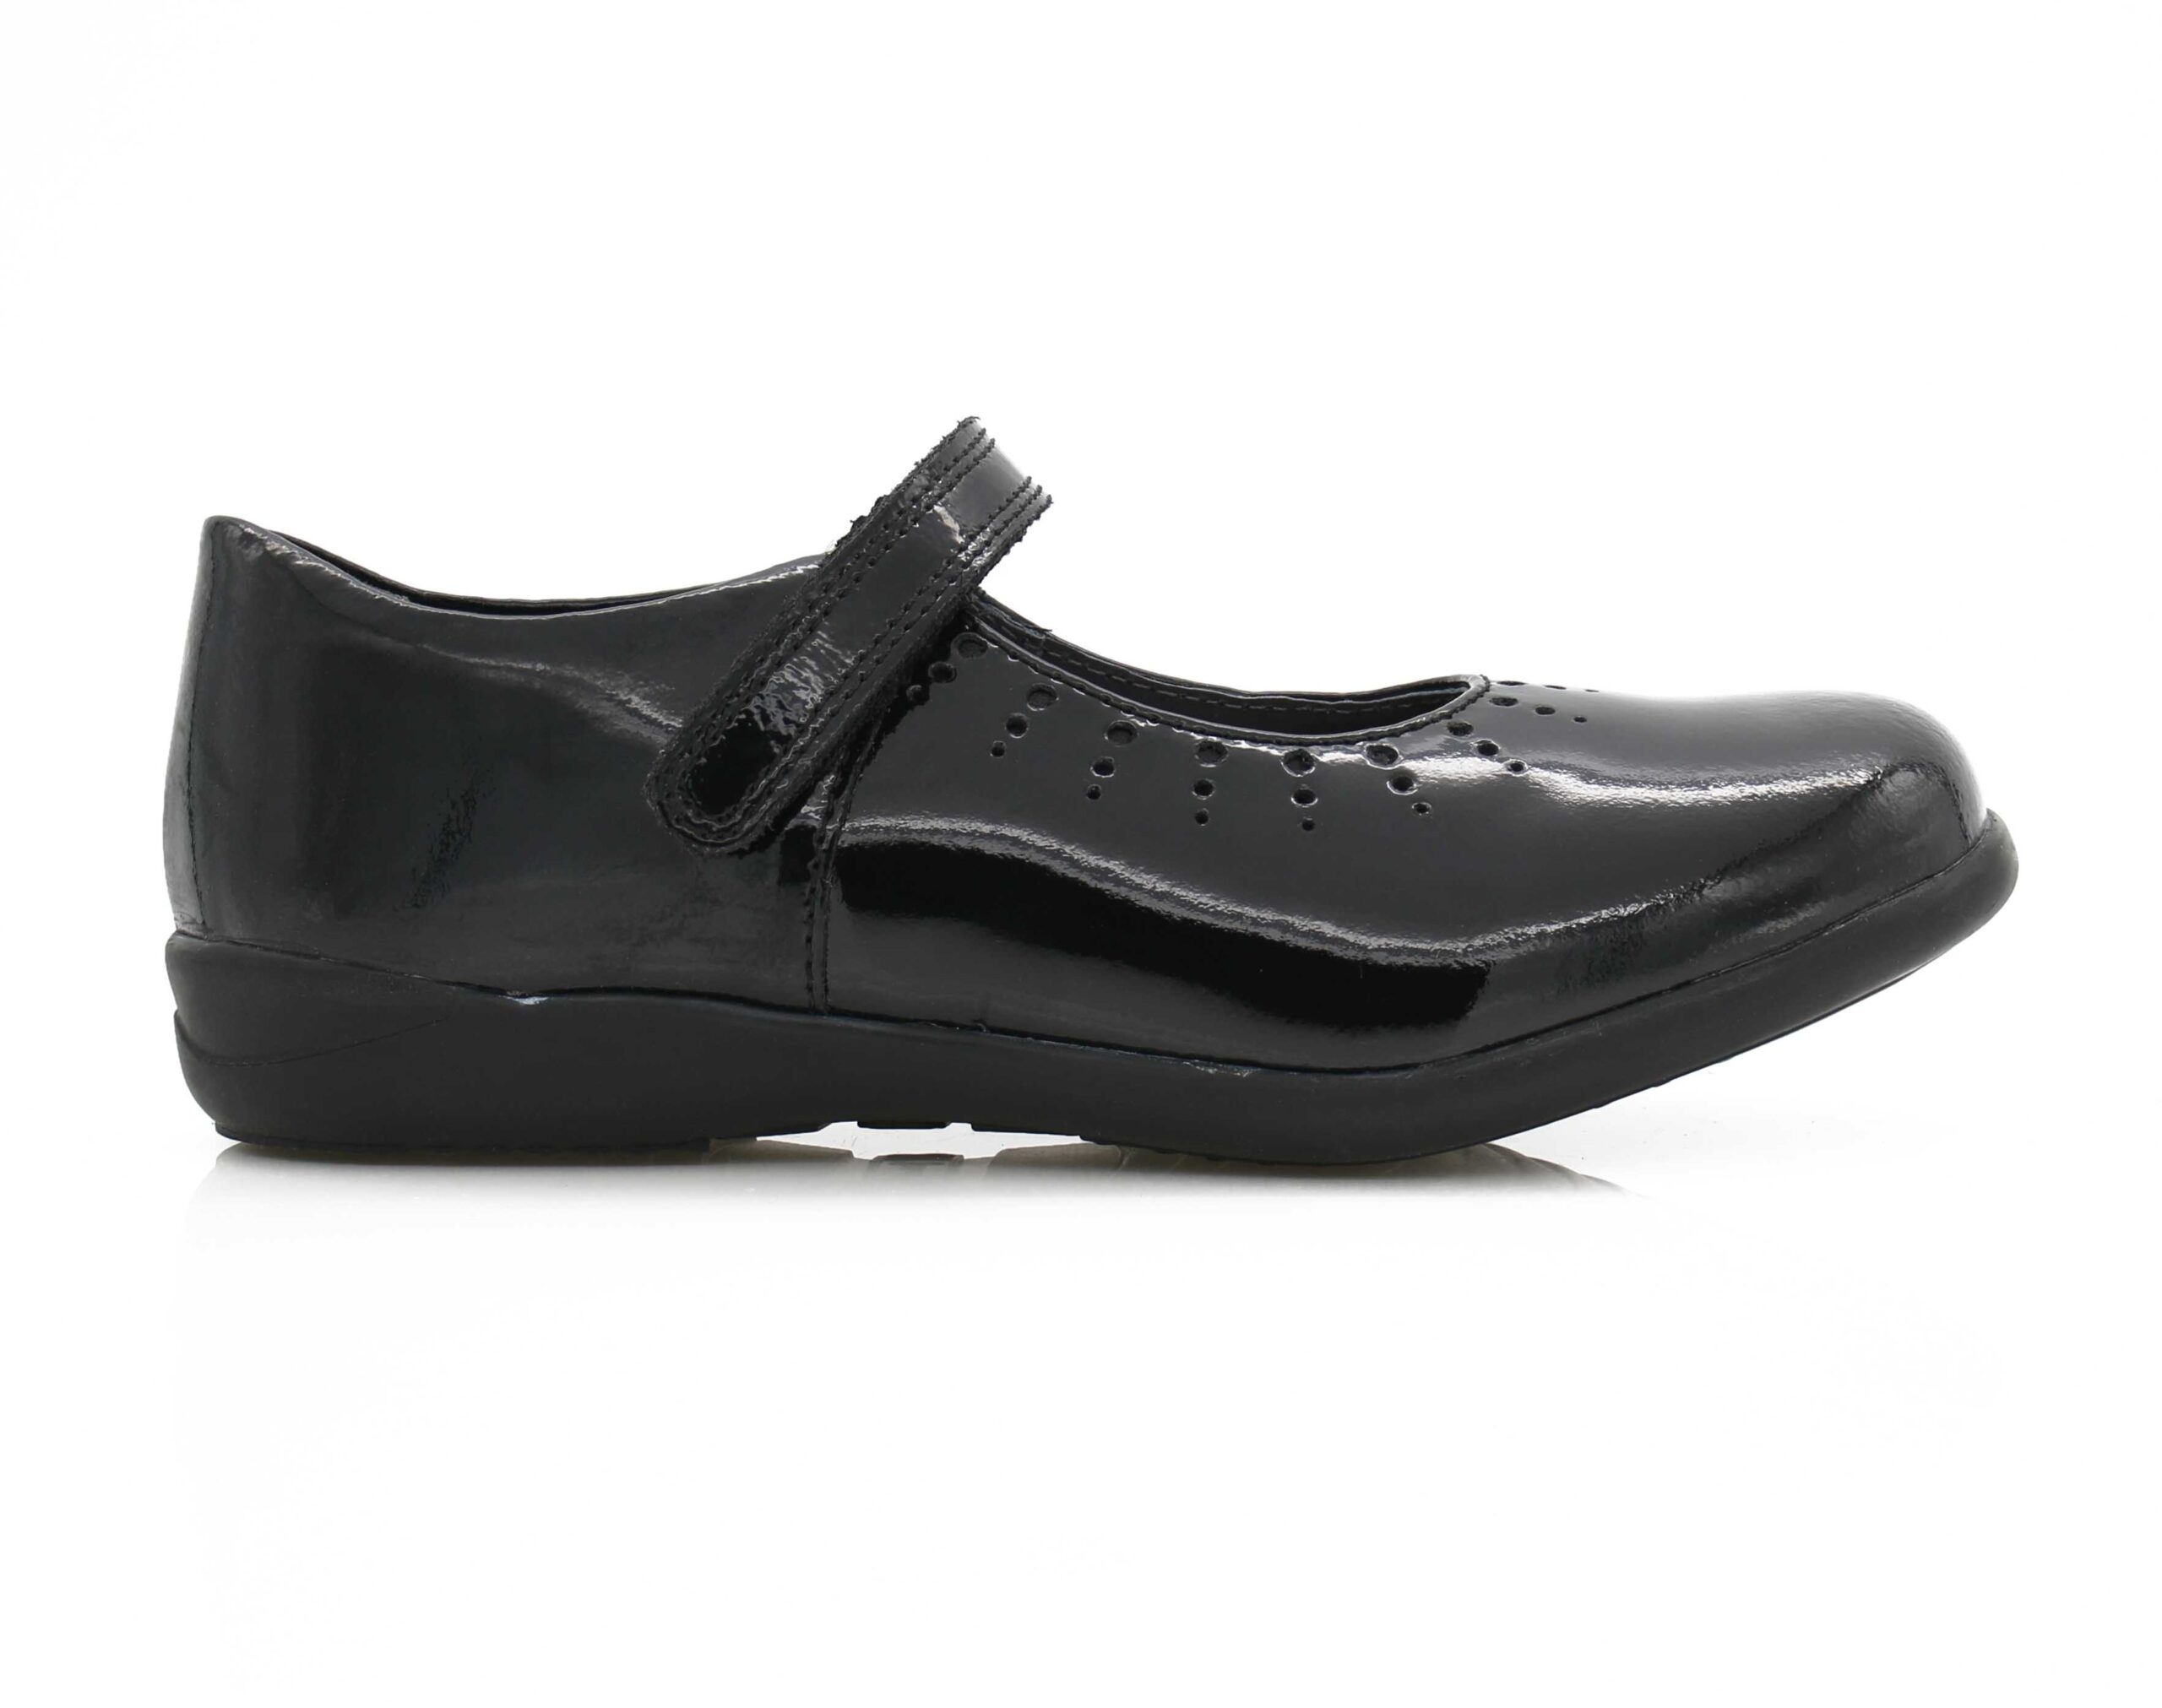 Womens Start Rite Mary Jane – Black Patent School Shoes – Velcro – Strong Heel Support – Adjustable Width – Size K9.5 / Width G – Patent / Leather